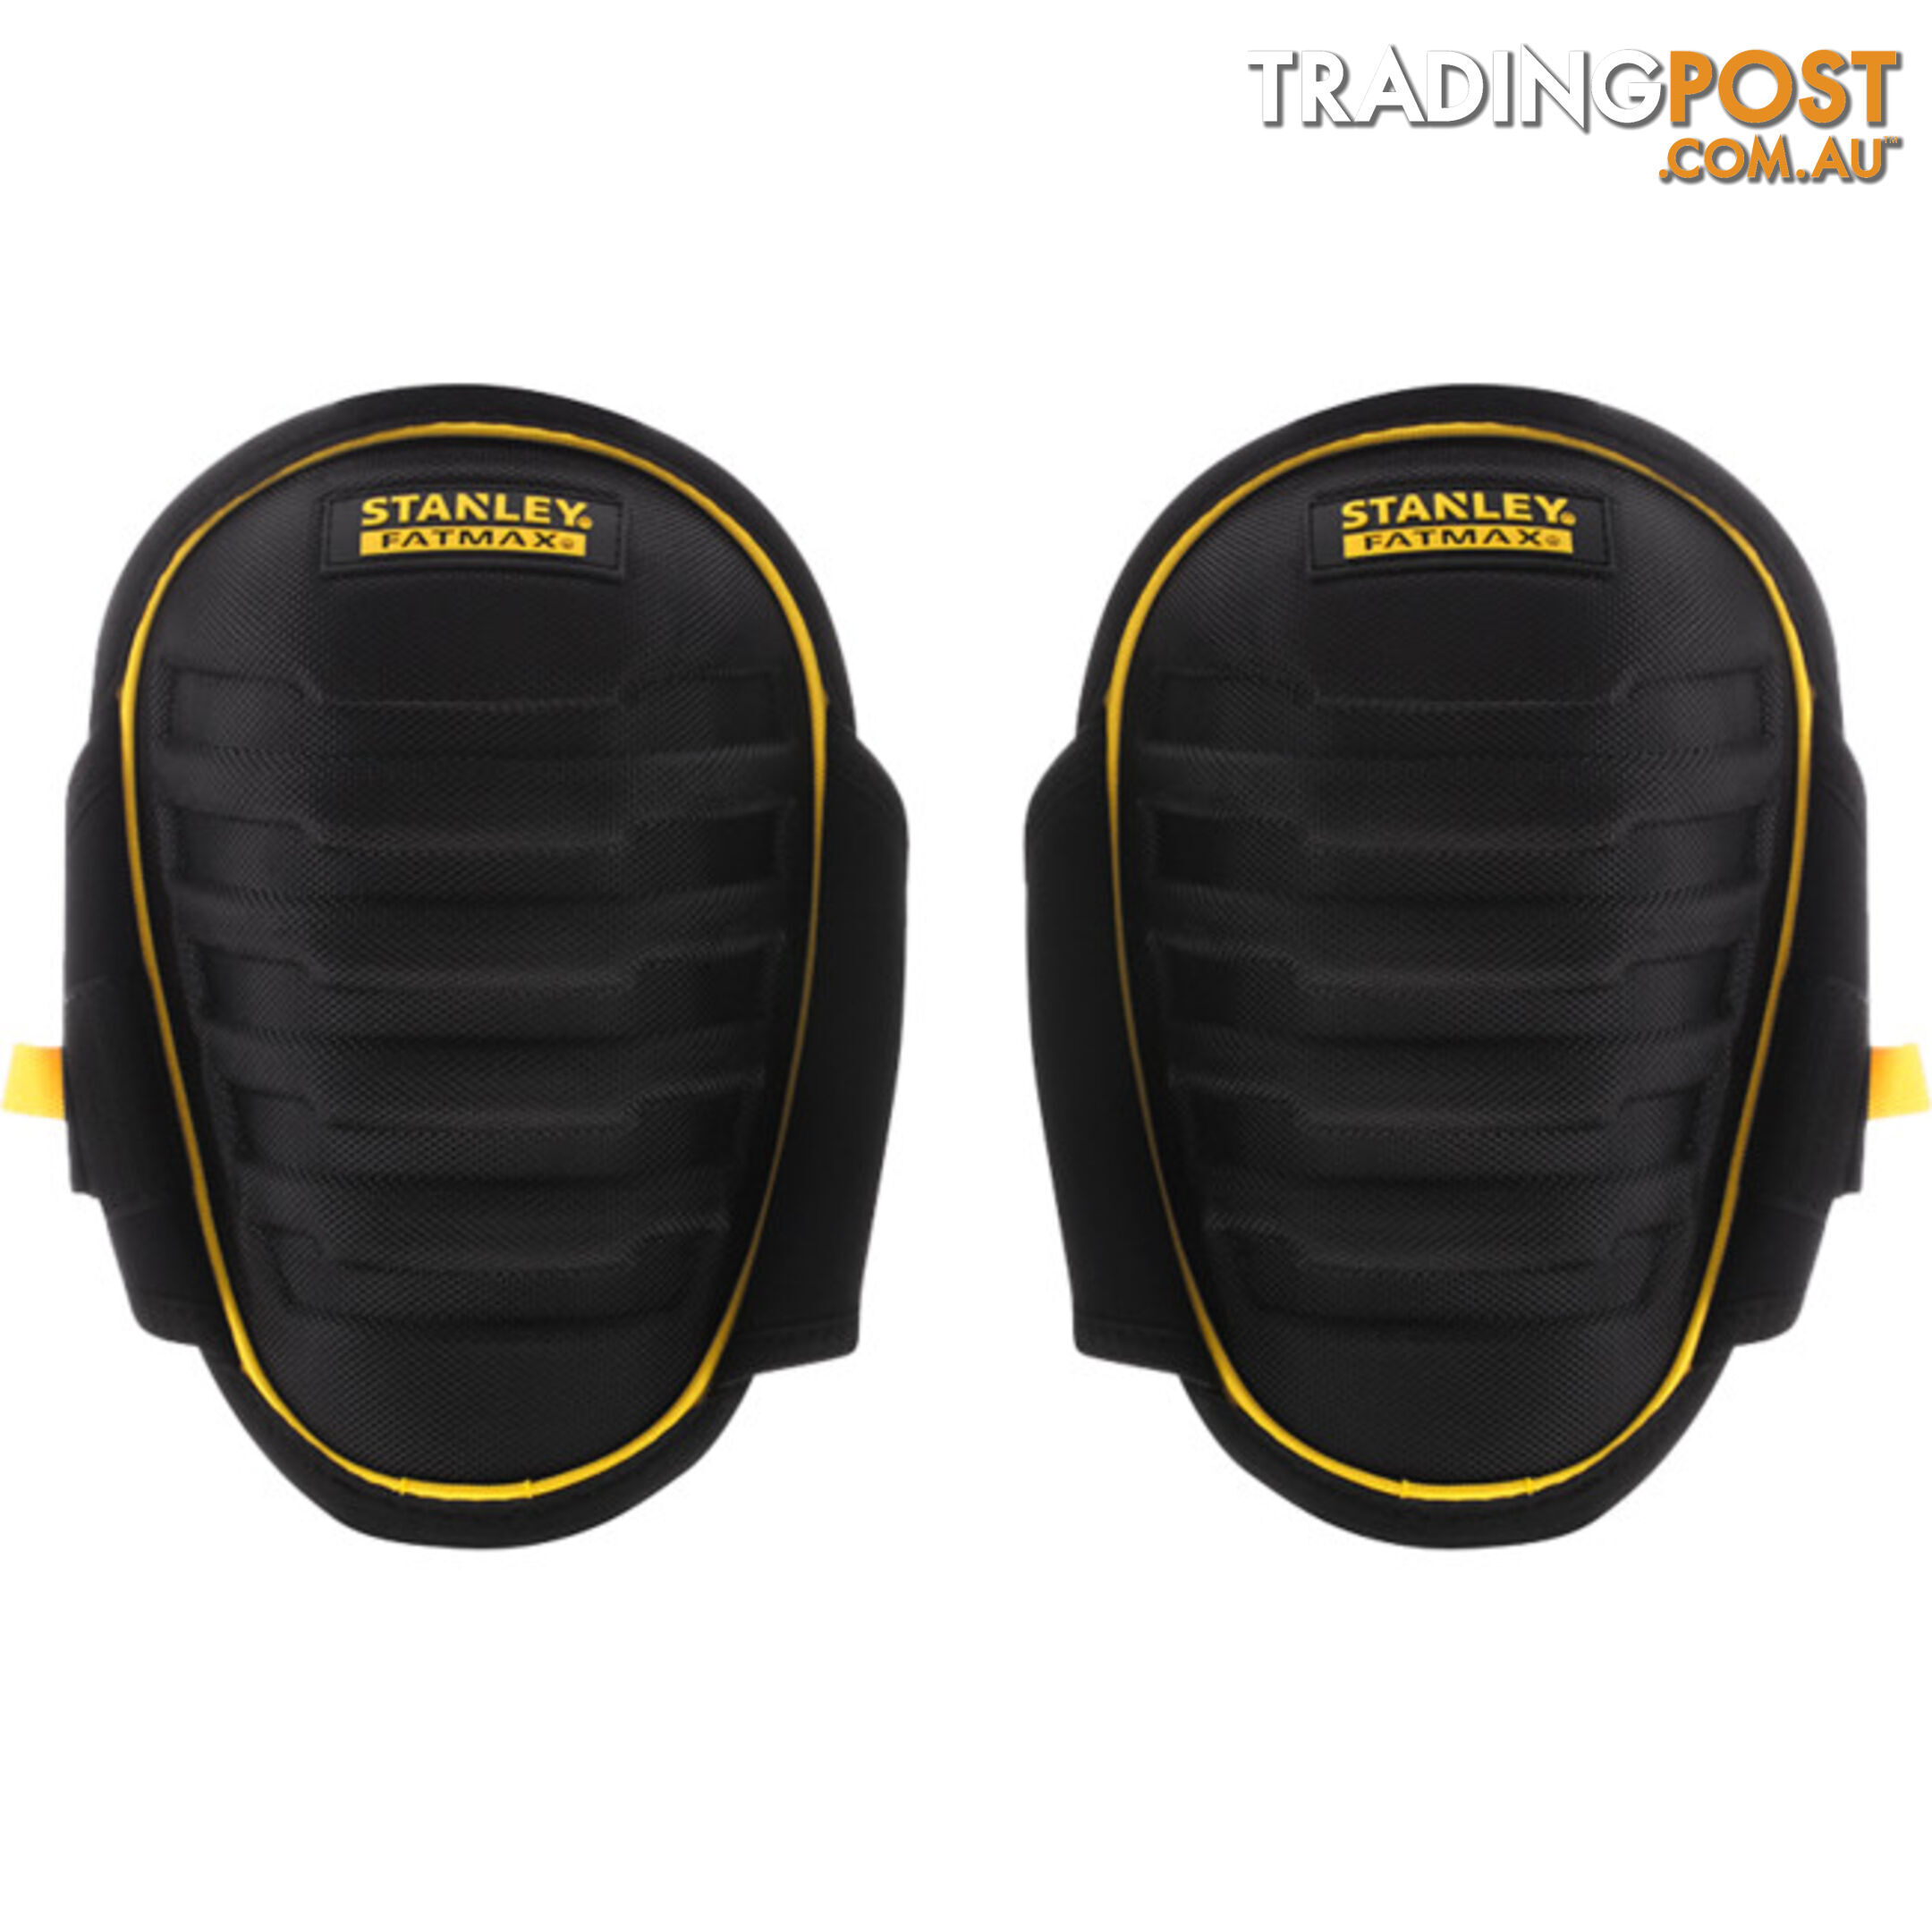 FMST829591 SEMI-HARD THERMOFORM KNEE PADS WITH MEMORY GEL - FATMAX